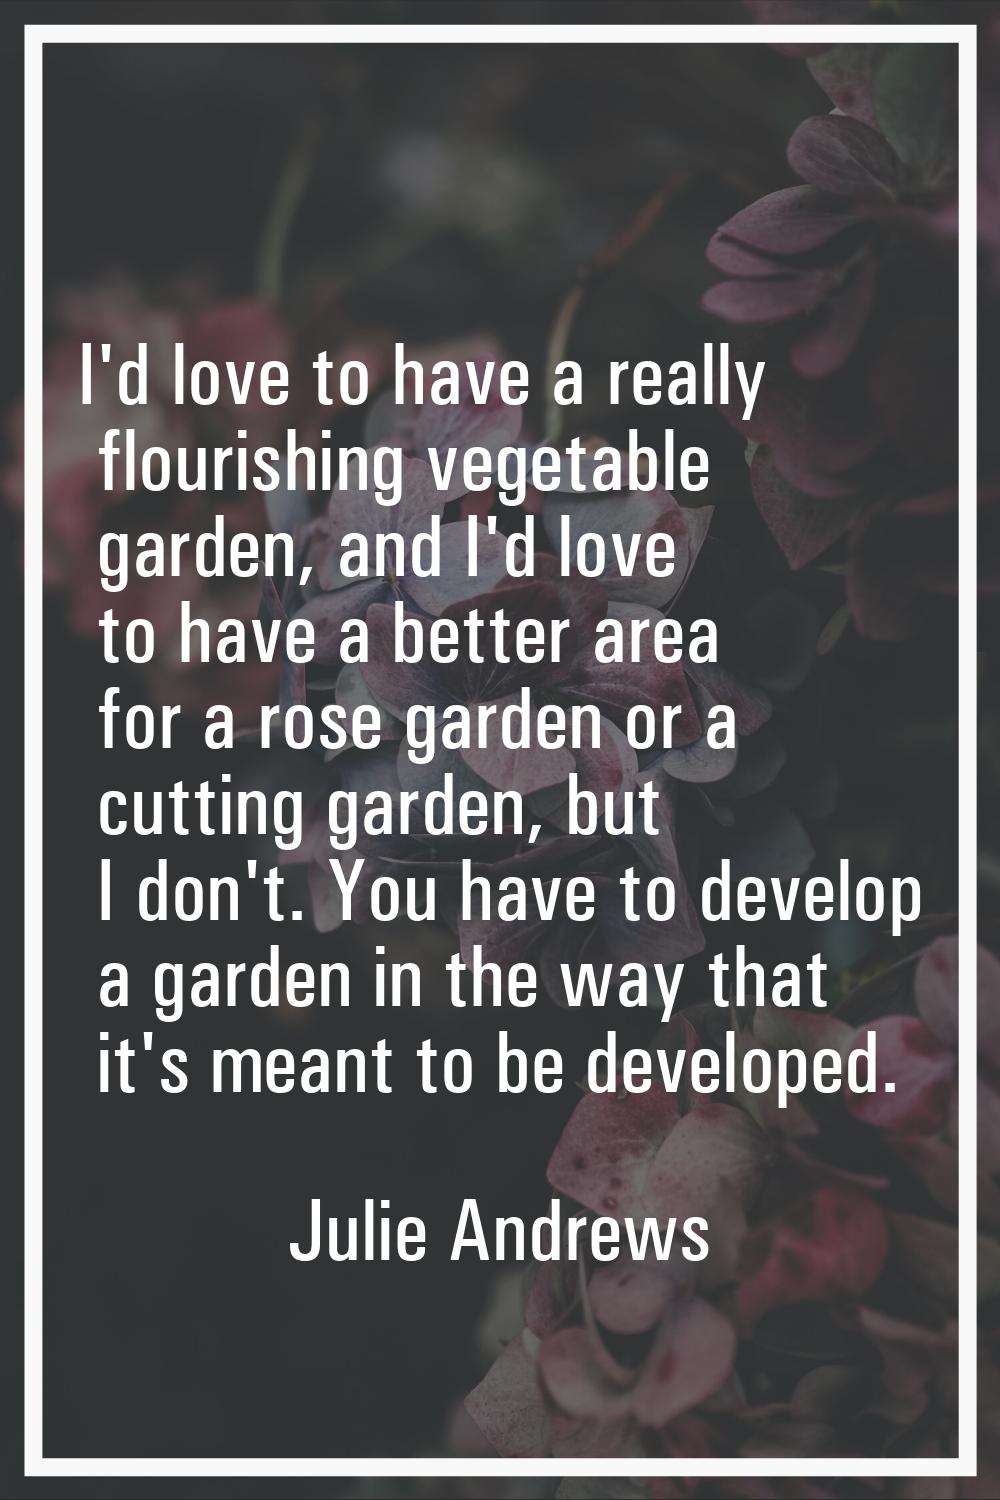 I'd love to have a really flourishing vegetable garden, and I'd love to have a better area for a ro